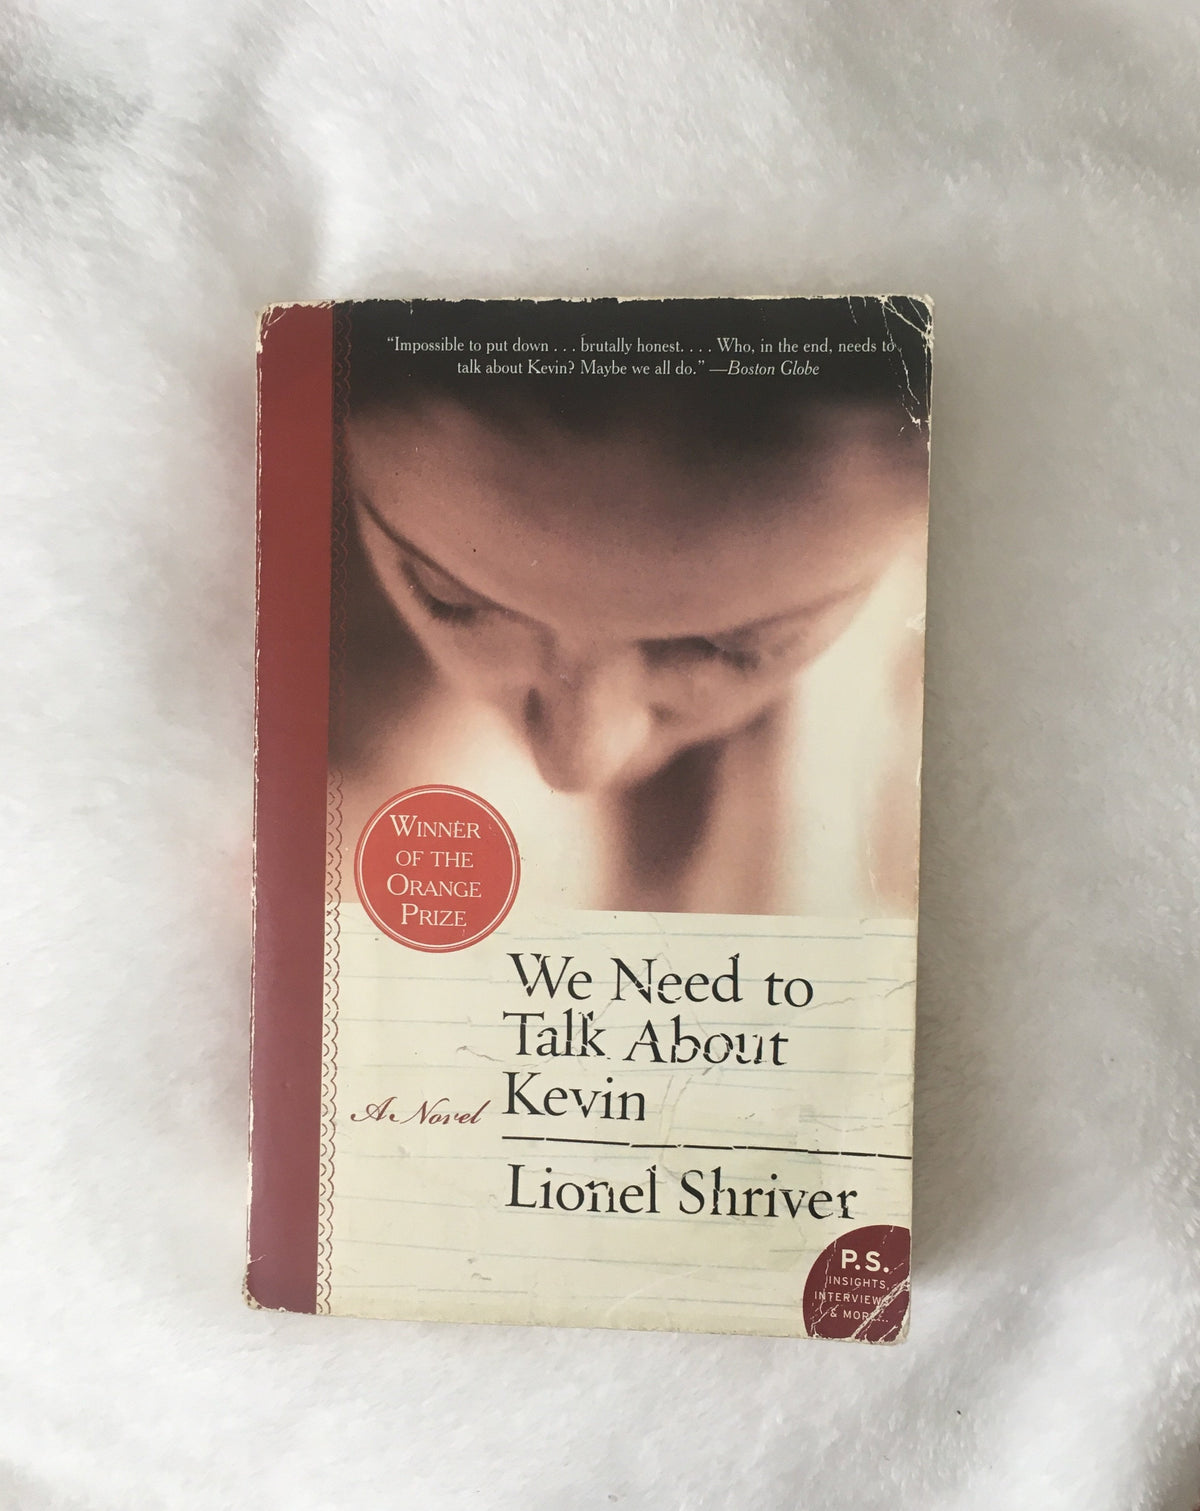 We Need to Talk About Kevin by Lionel Shriver, book, Ten Dollar Books, Ten Dollar Books